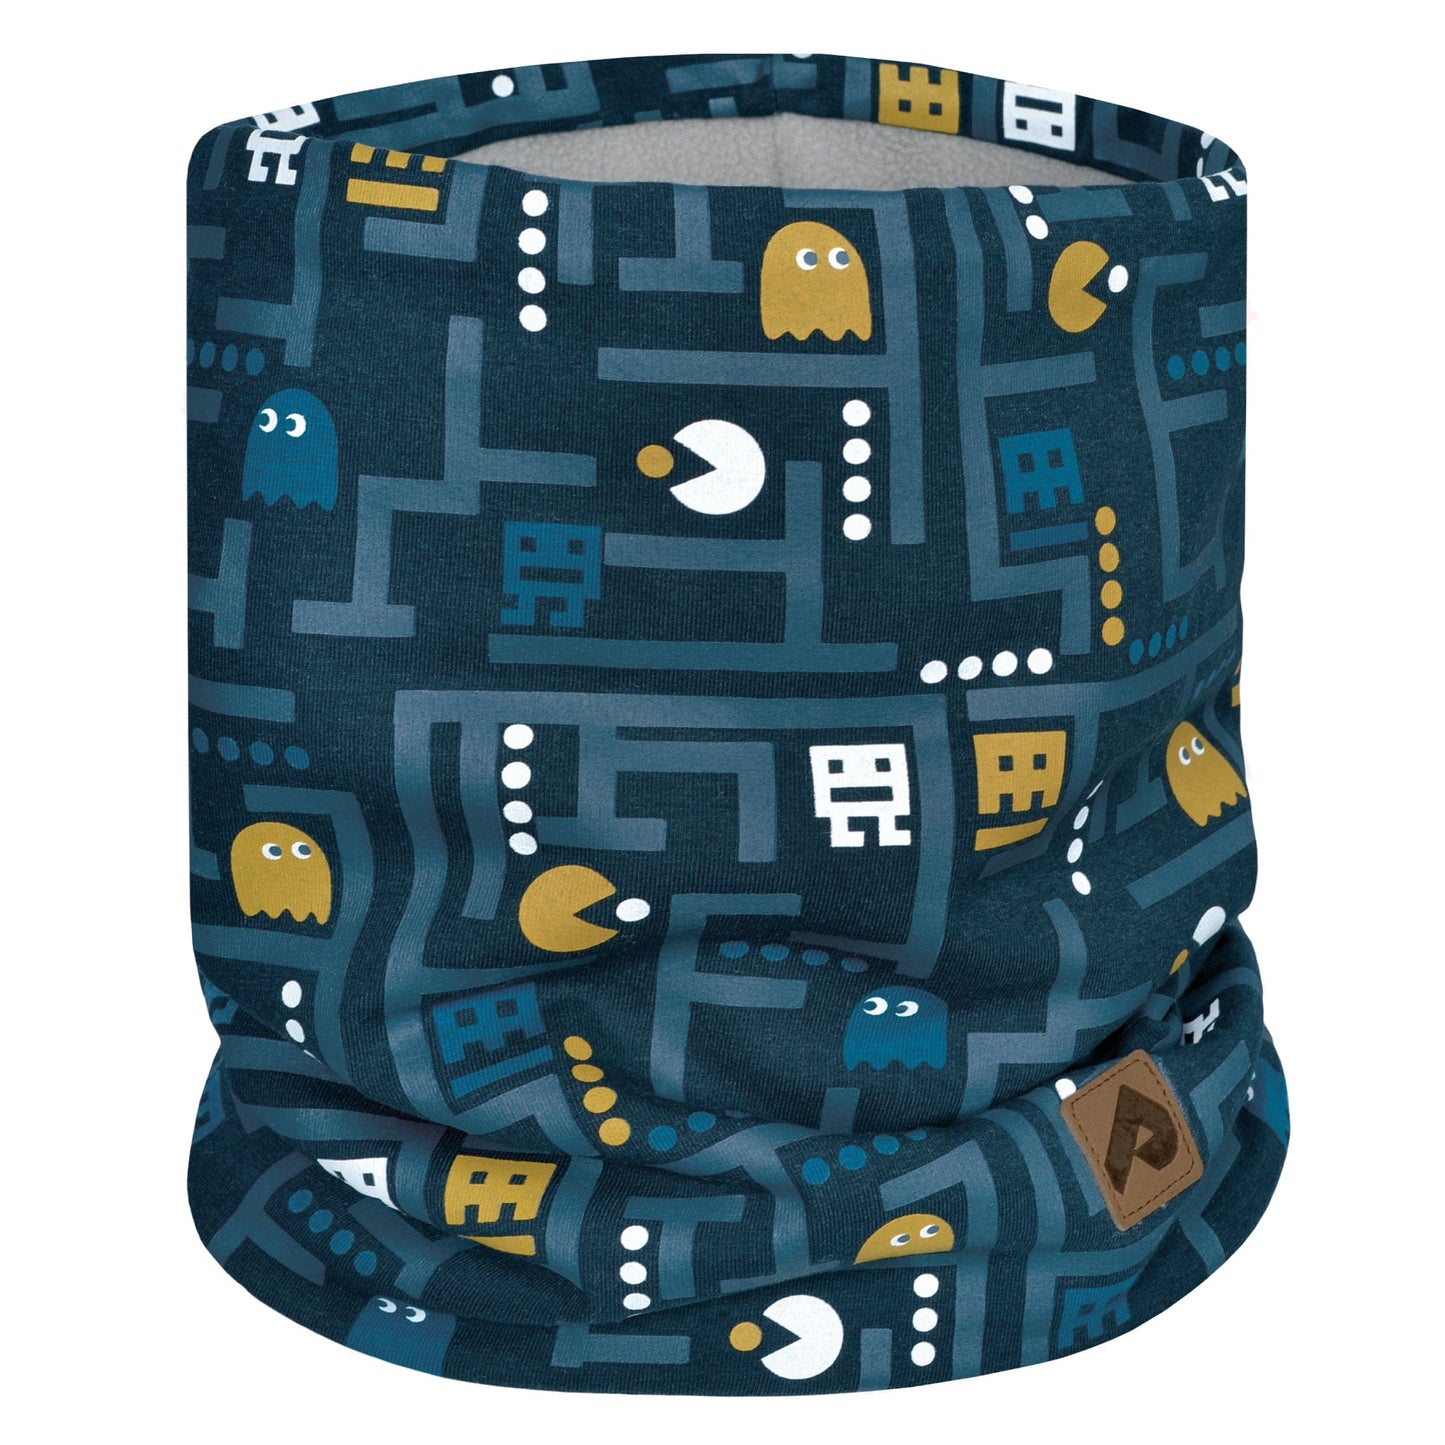 Cotton neck warmer with fleece lining - Videogame